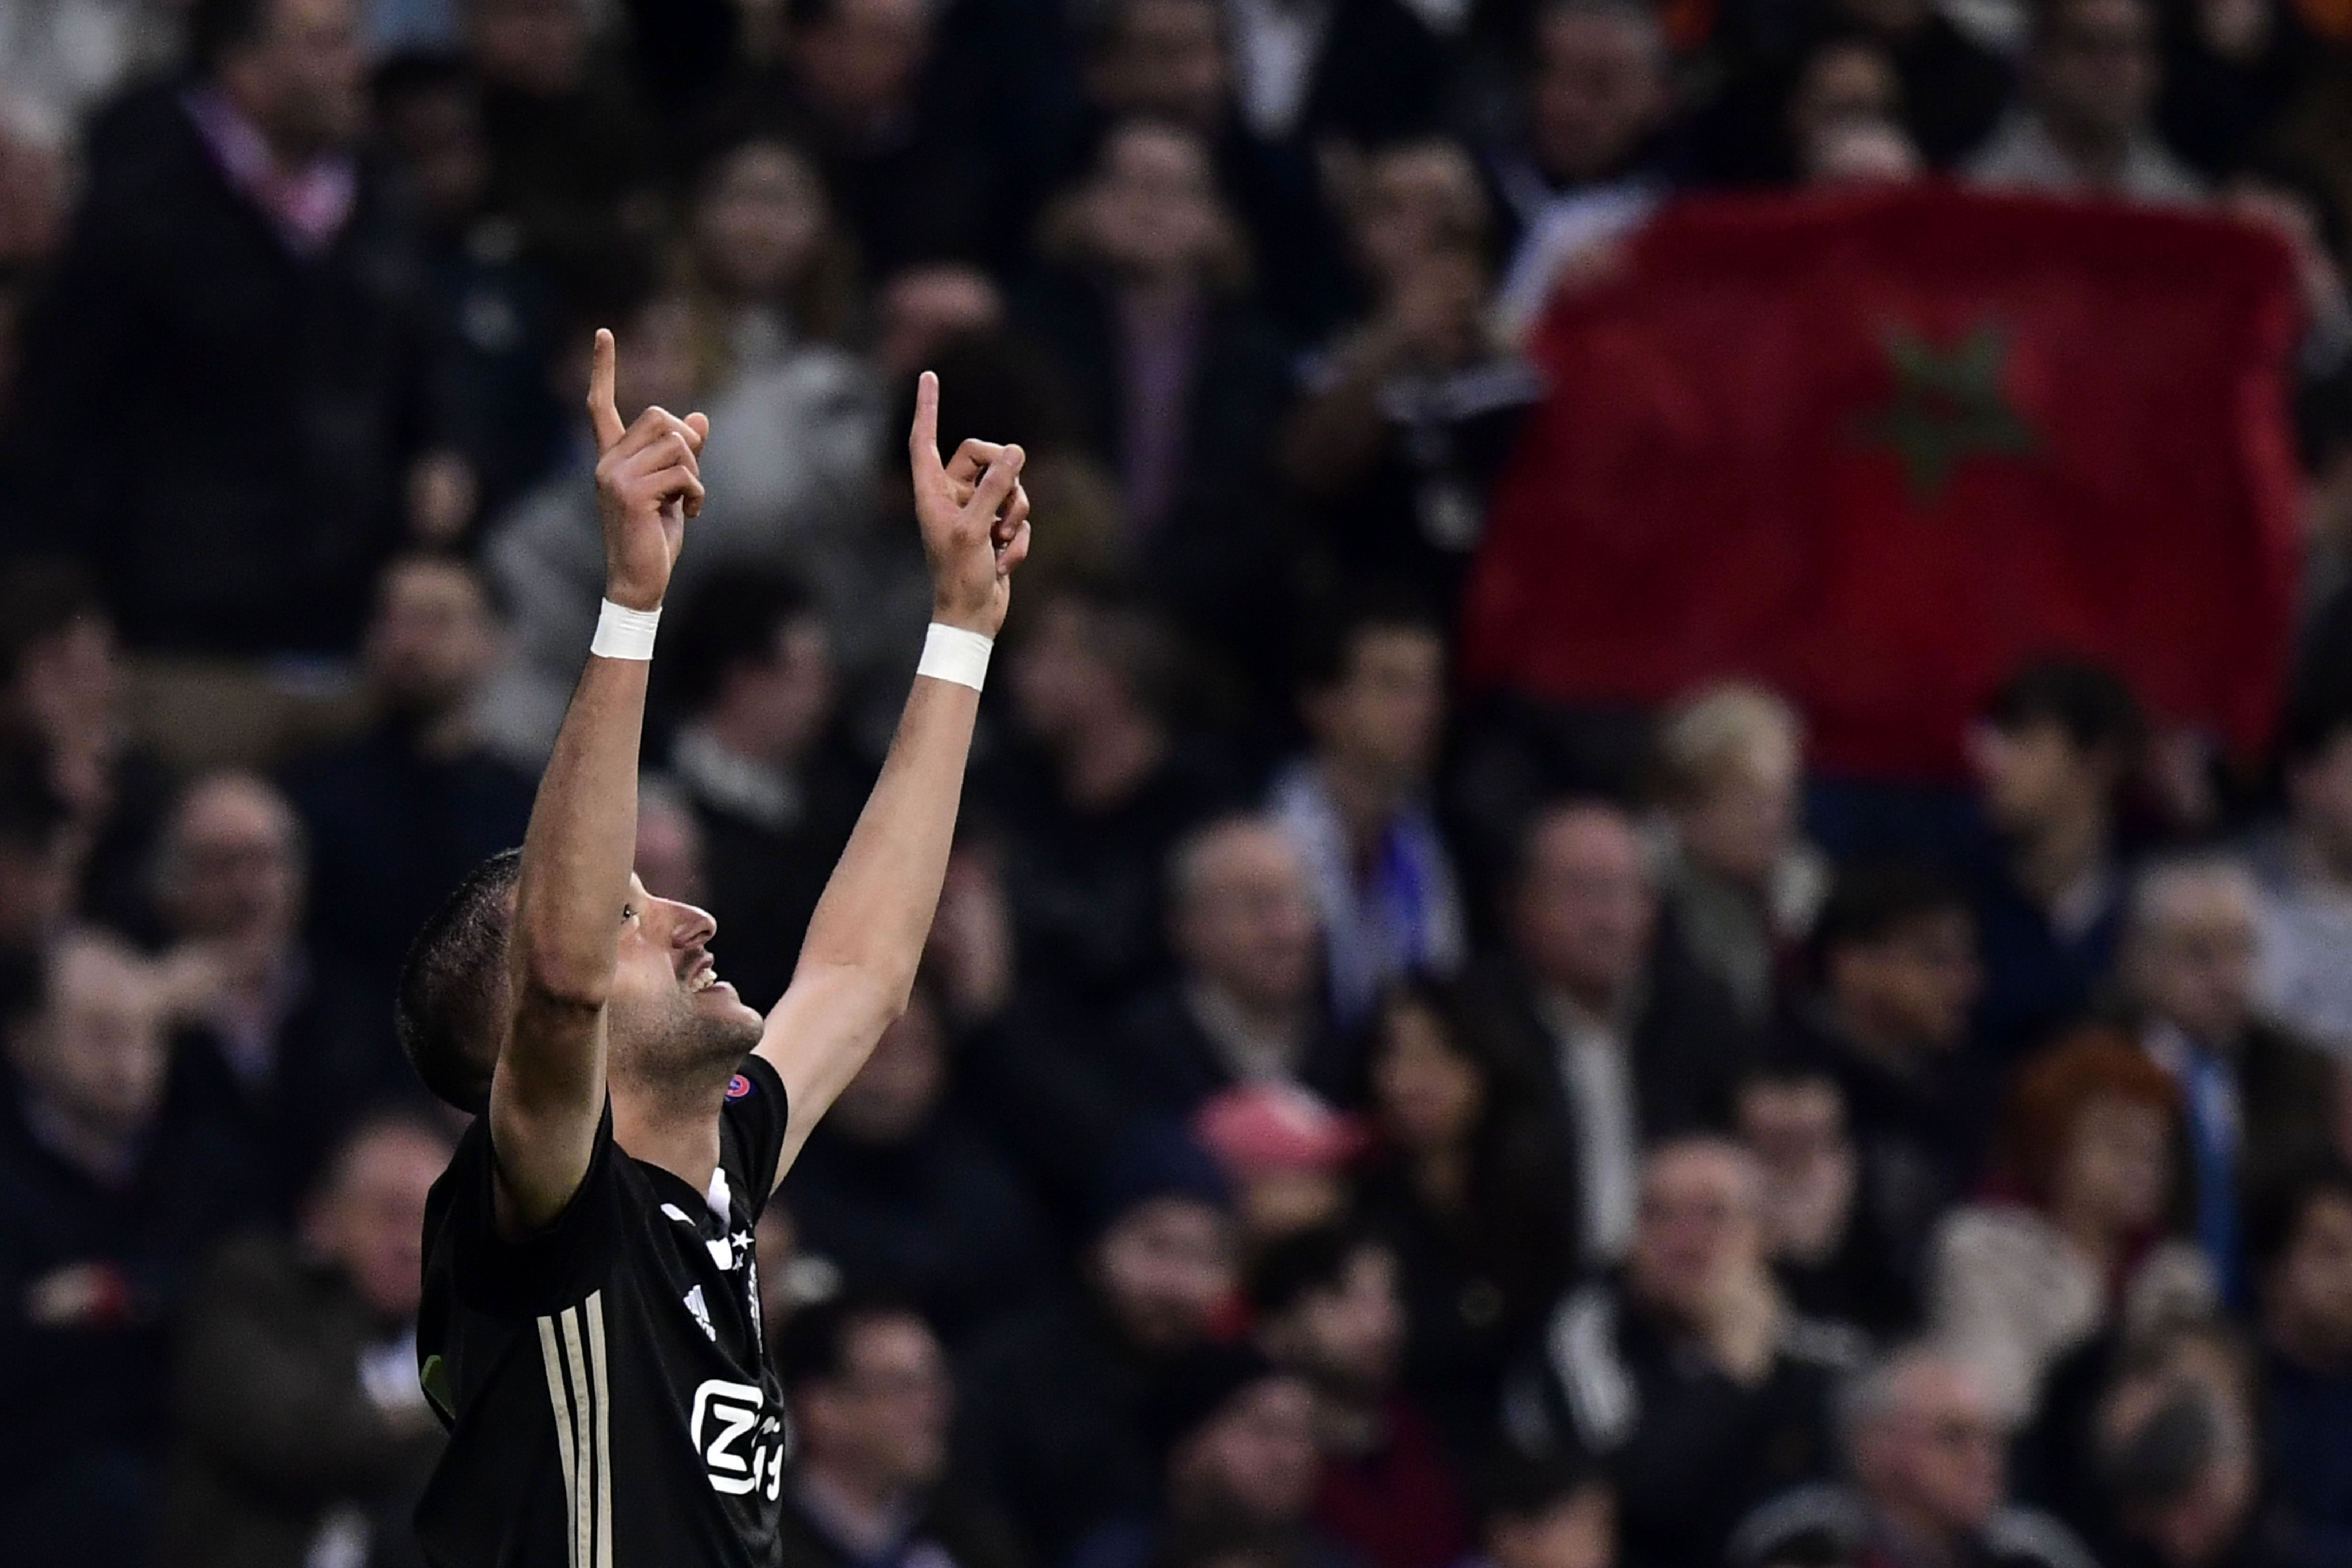 Ajax's Moroccan midfielder Hakim Ziyech celebrates after scoring a goal against Real Madrid's Belgian goalkeeper Thibaut Courtois (R) during the UEFA Champions League round of 16 second leg football match between Real Madrid CF and Ajax at the Santiago Bernabeu stadium in Madrid on March 5, 2019. (Photo by JAVIER SORIANO / AFP)        (Photo credit should read JAVIER SORIANO/AFP/Getty Images)